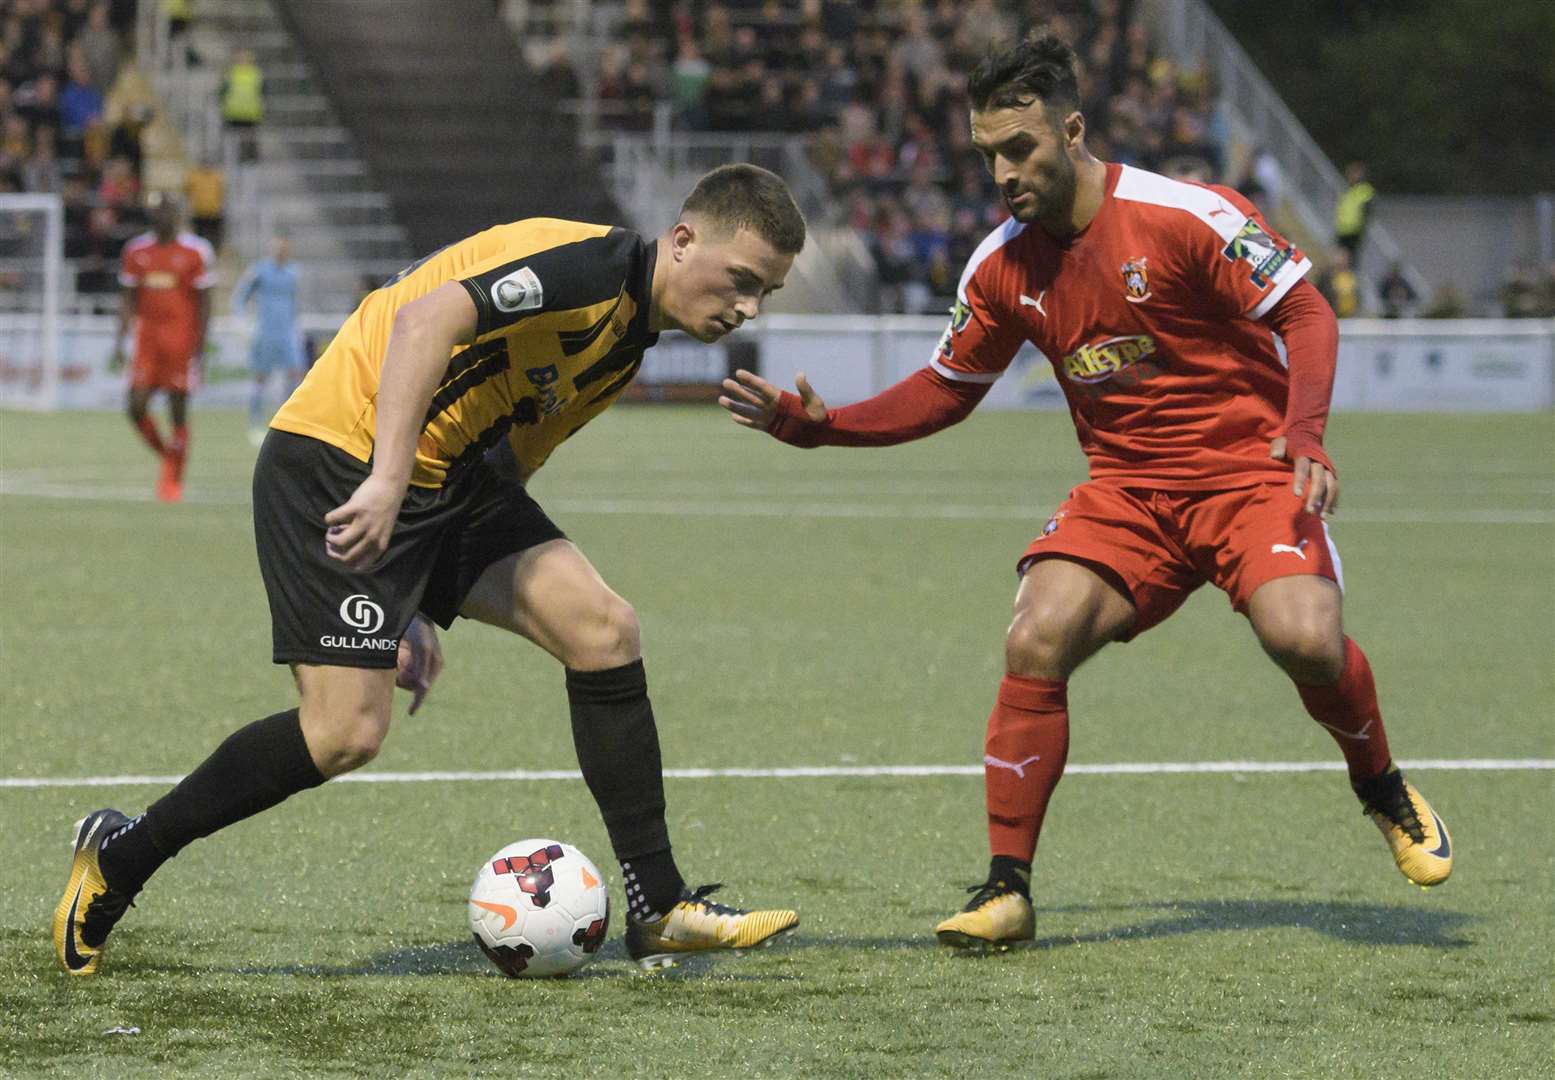 Jack Paxman stayed at Maidstone after a heart-to-heart with the boss Picture: Andy Payton